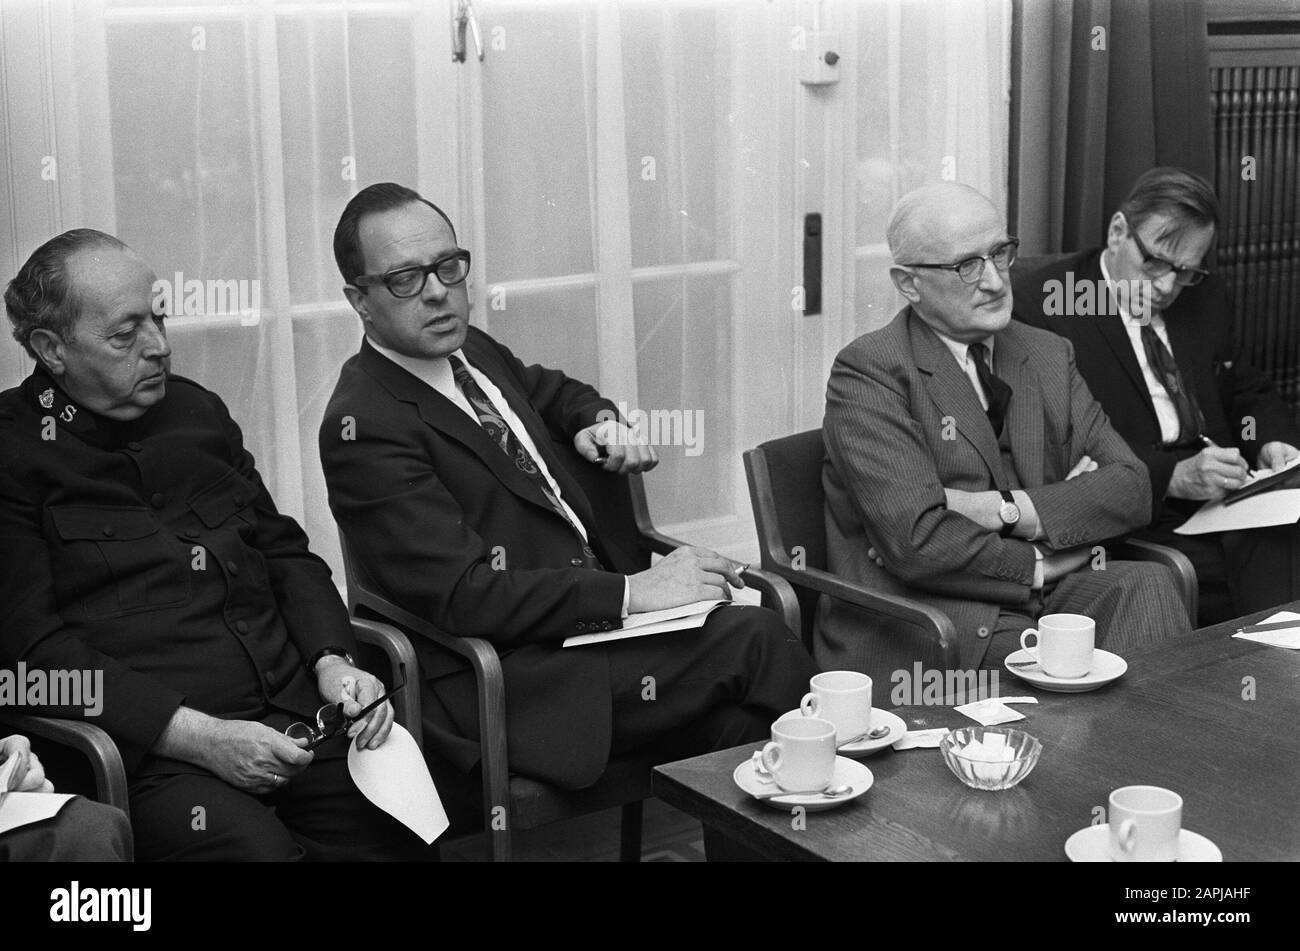 Delegation of American Council of Churches speaks with Dutch Churches about bombing in Vietnam, Fiolet (secretary) speaking, left Mast (Army des Date: January 9, 1973 Type of material: Negative (black/white) Keywords: BOMBARDMENTS, CHURKES, discussions, delegations Institution name: Council of Churches in the Netherlands Stock Photo